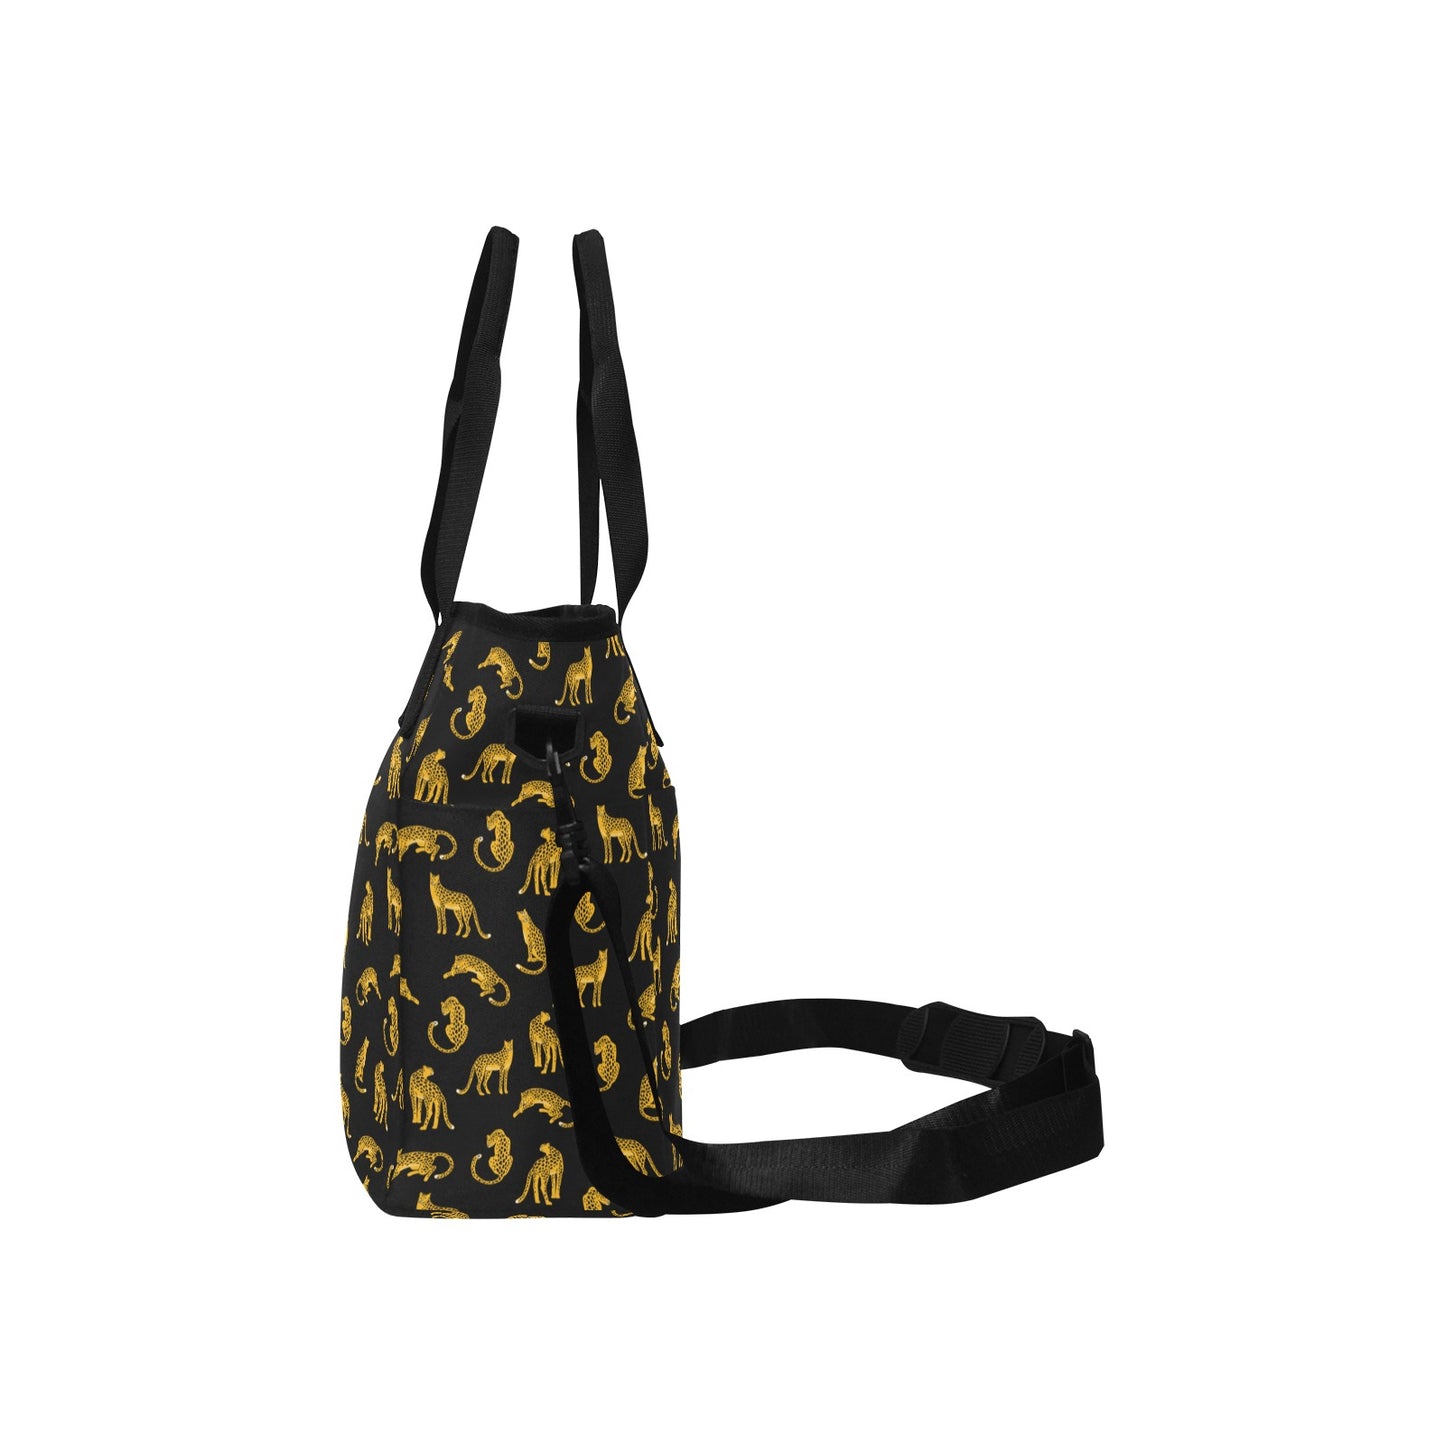 Leopard Canvas Tote Bag with Shoulder Strap, Animal Print Black Beach Summer Aesthetic Shopping Reusable Bag with Pockets Starcove Fashion